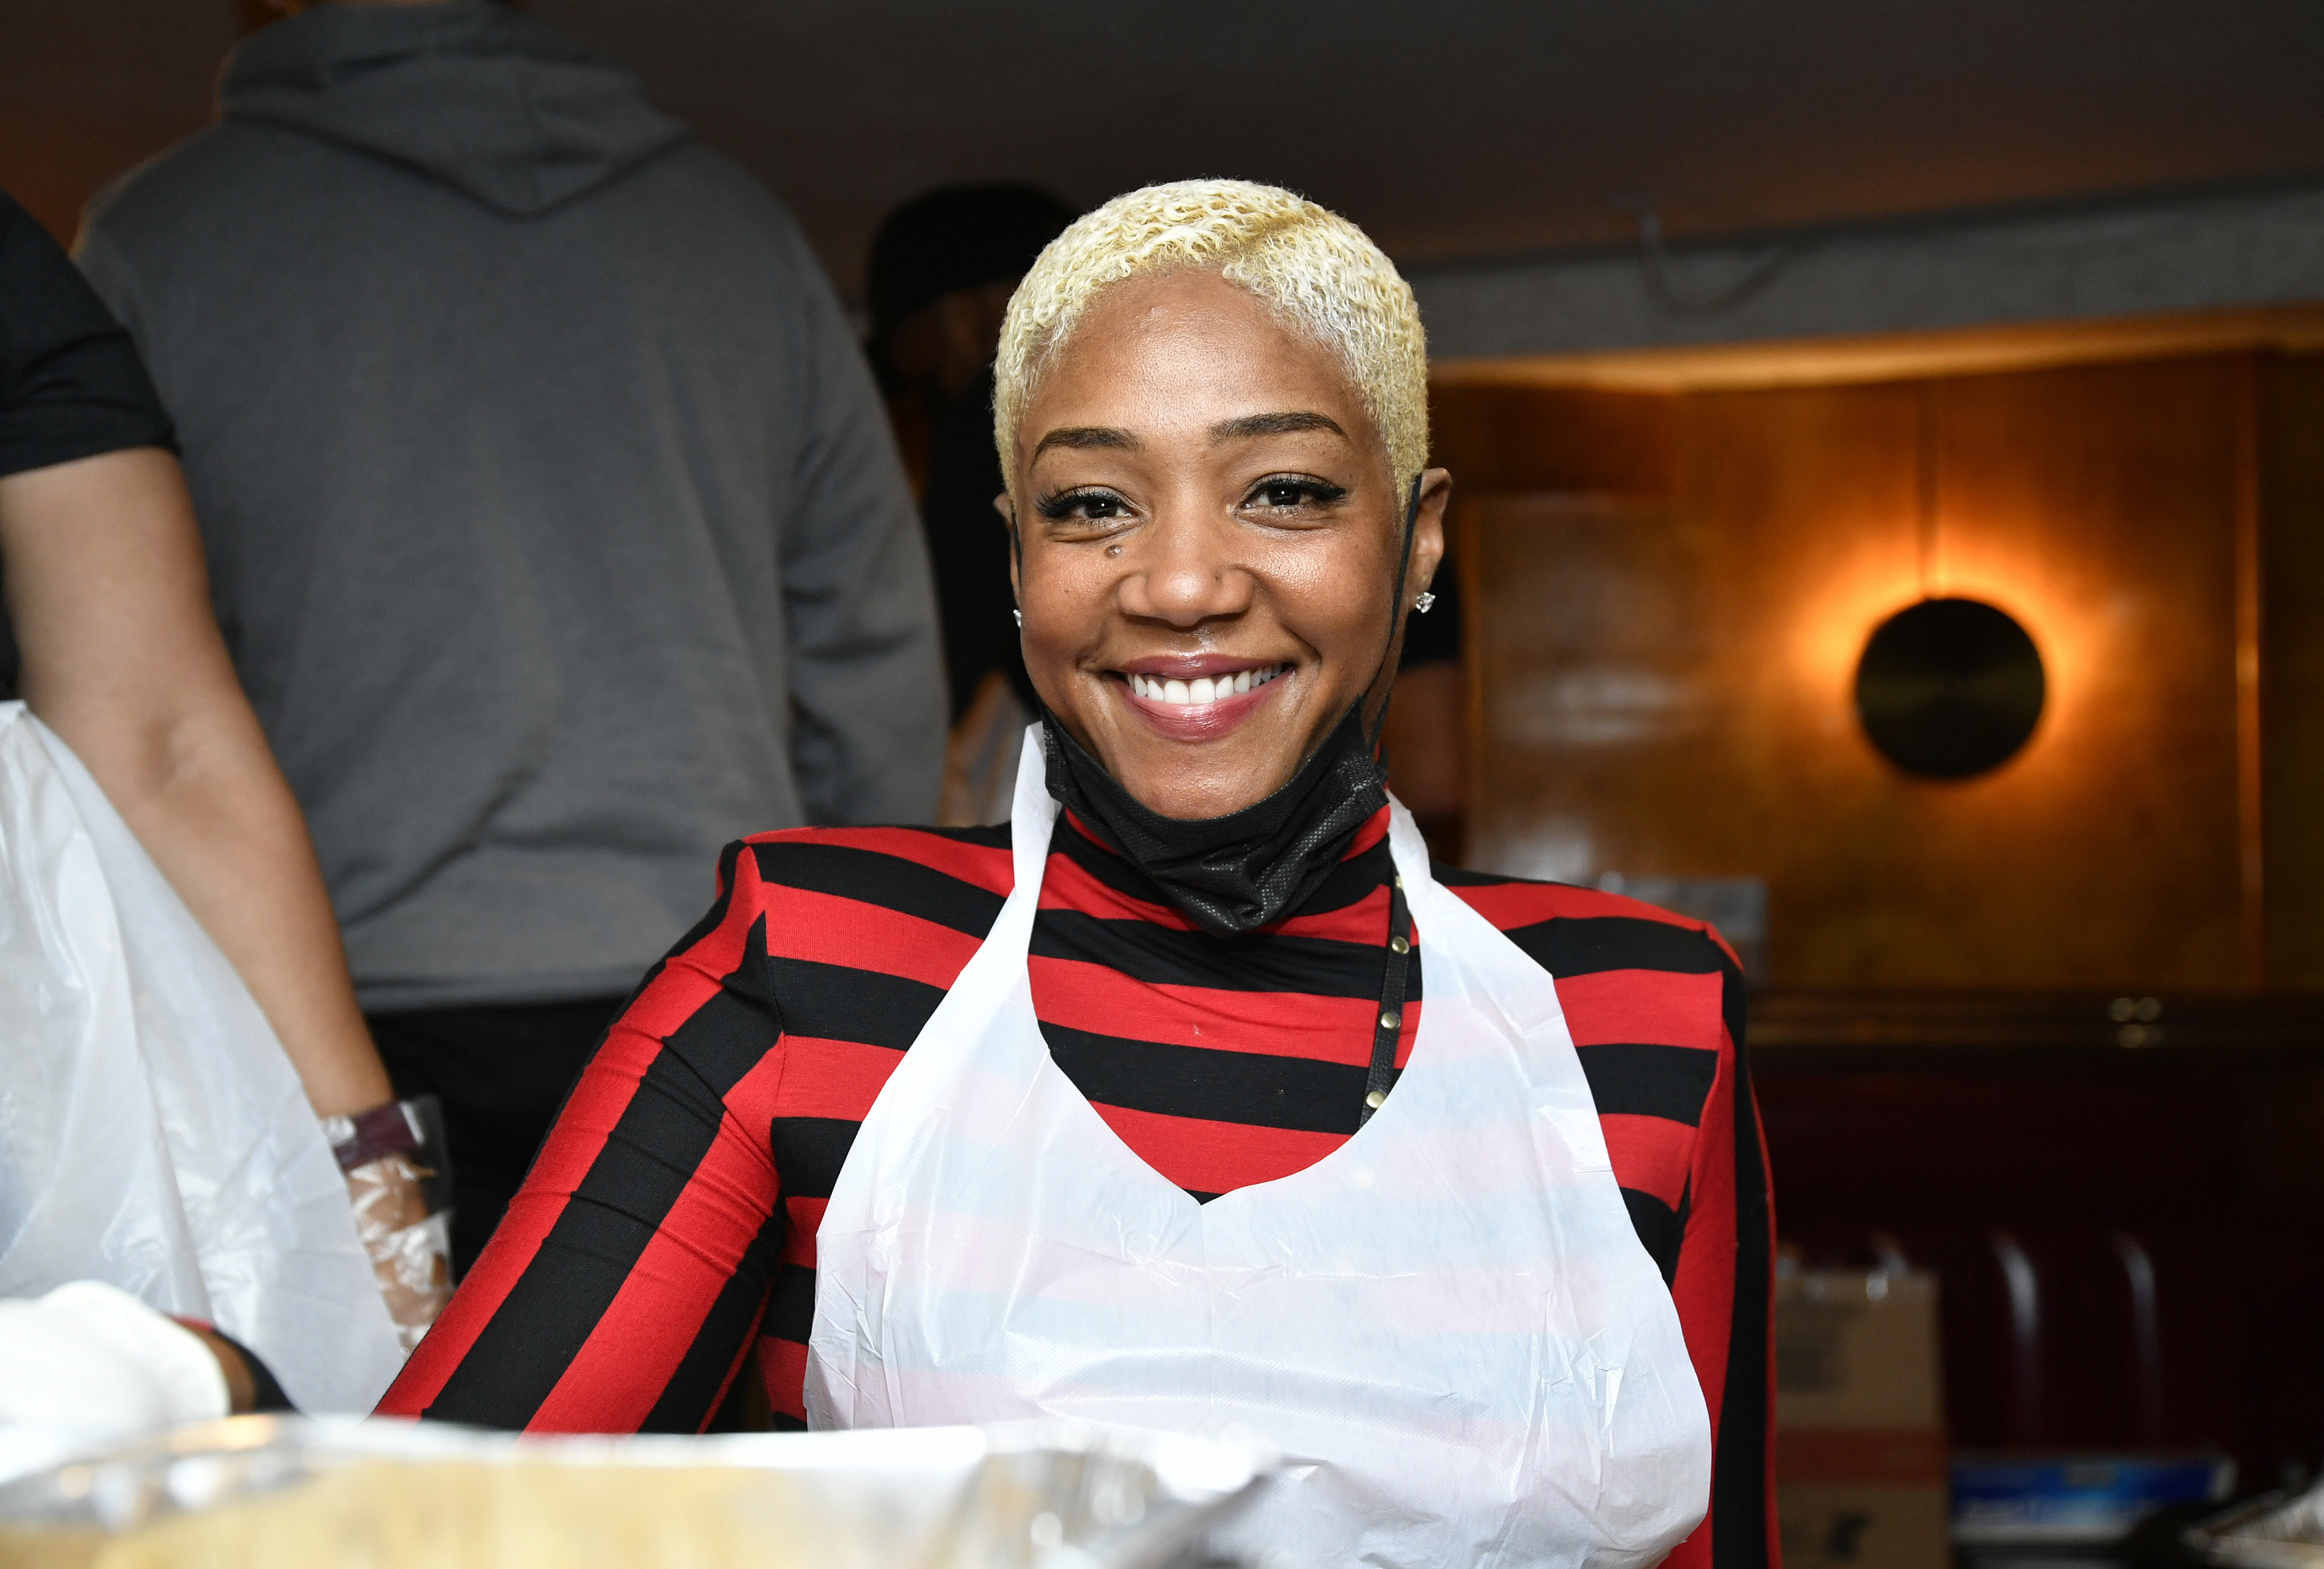 Haddish smiles for the camera while wearing an apron